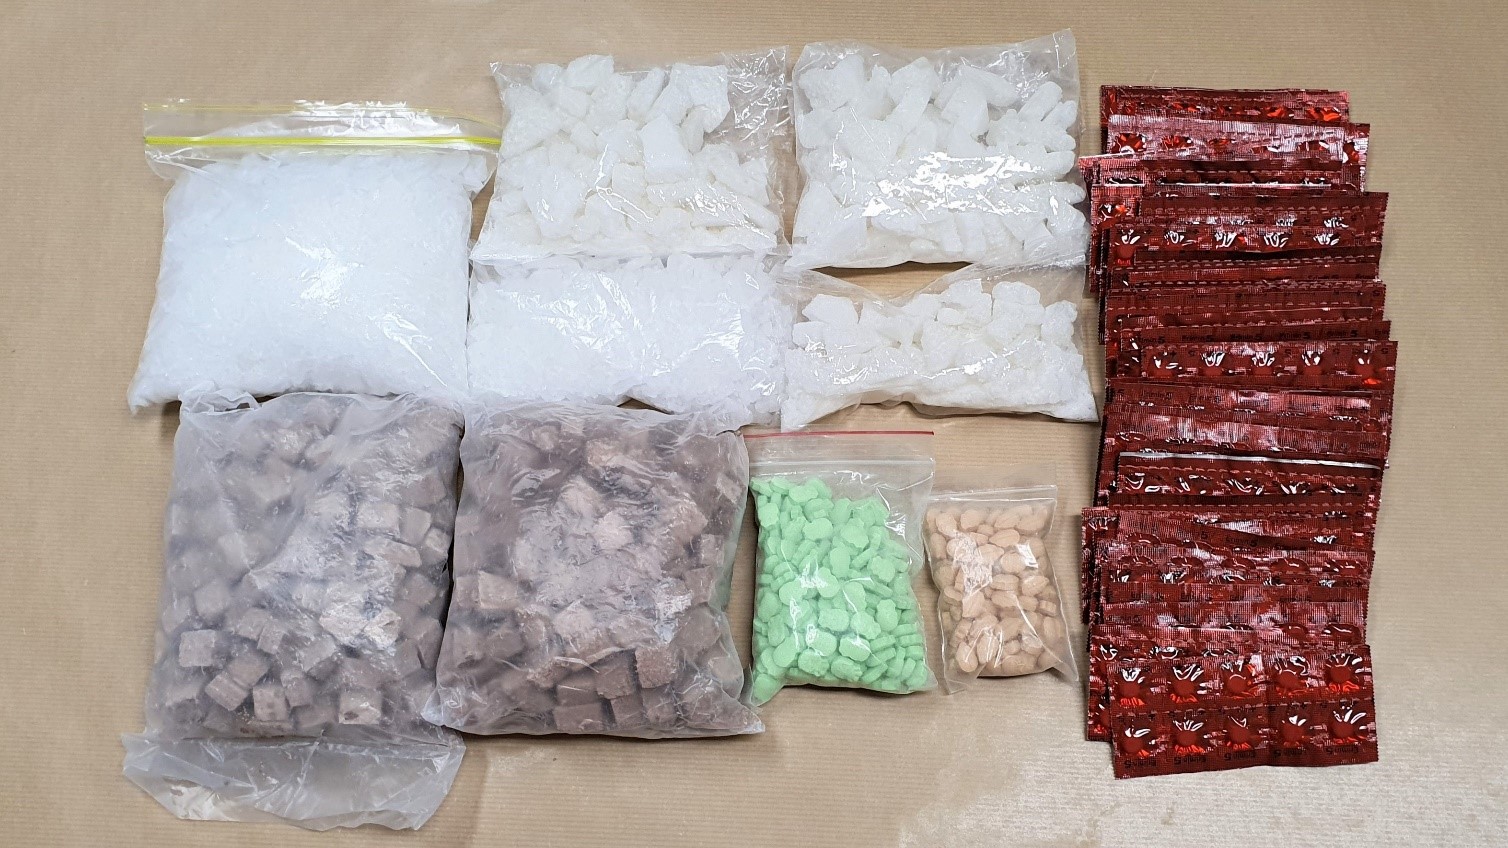 Photo 5 (CNB) –Drugs seized during an operation in the vicinity of Boon Lay Drive on 8 September 2020.